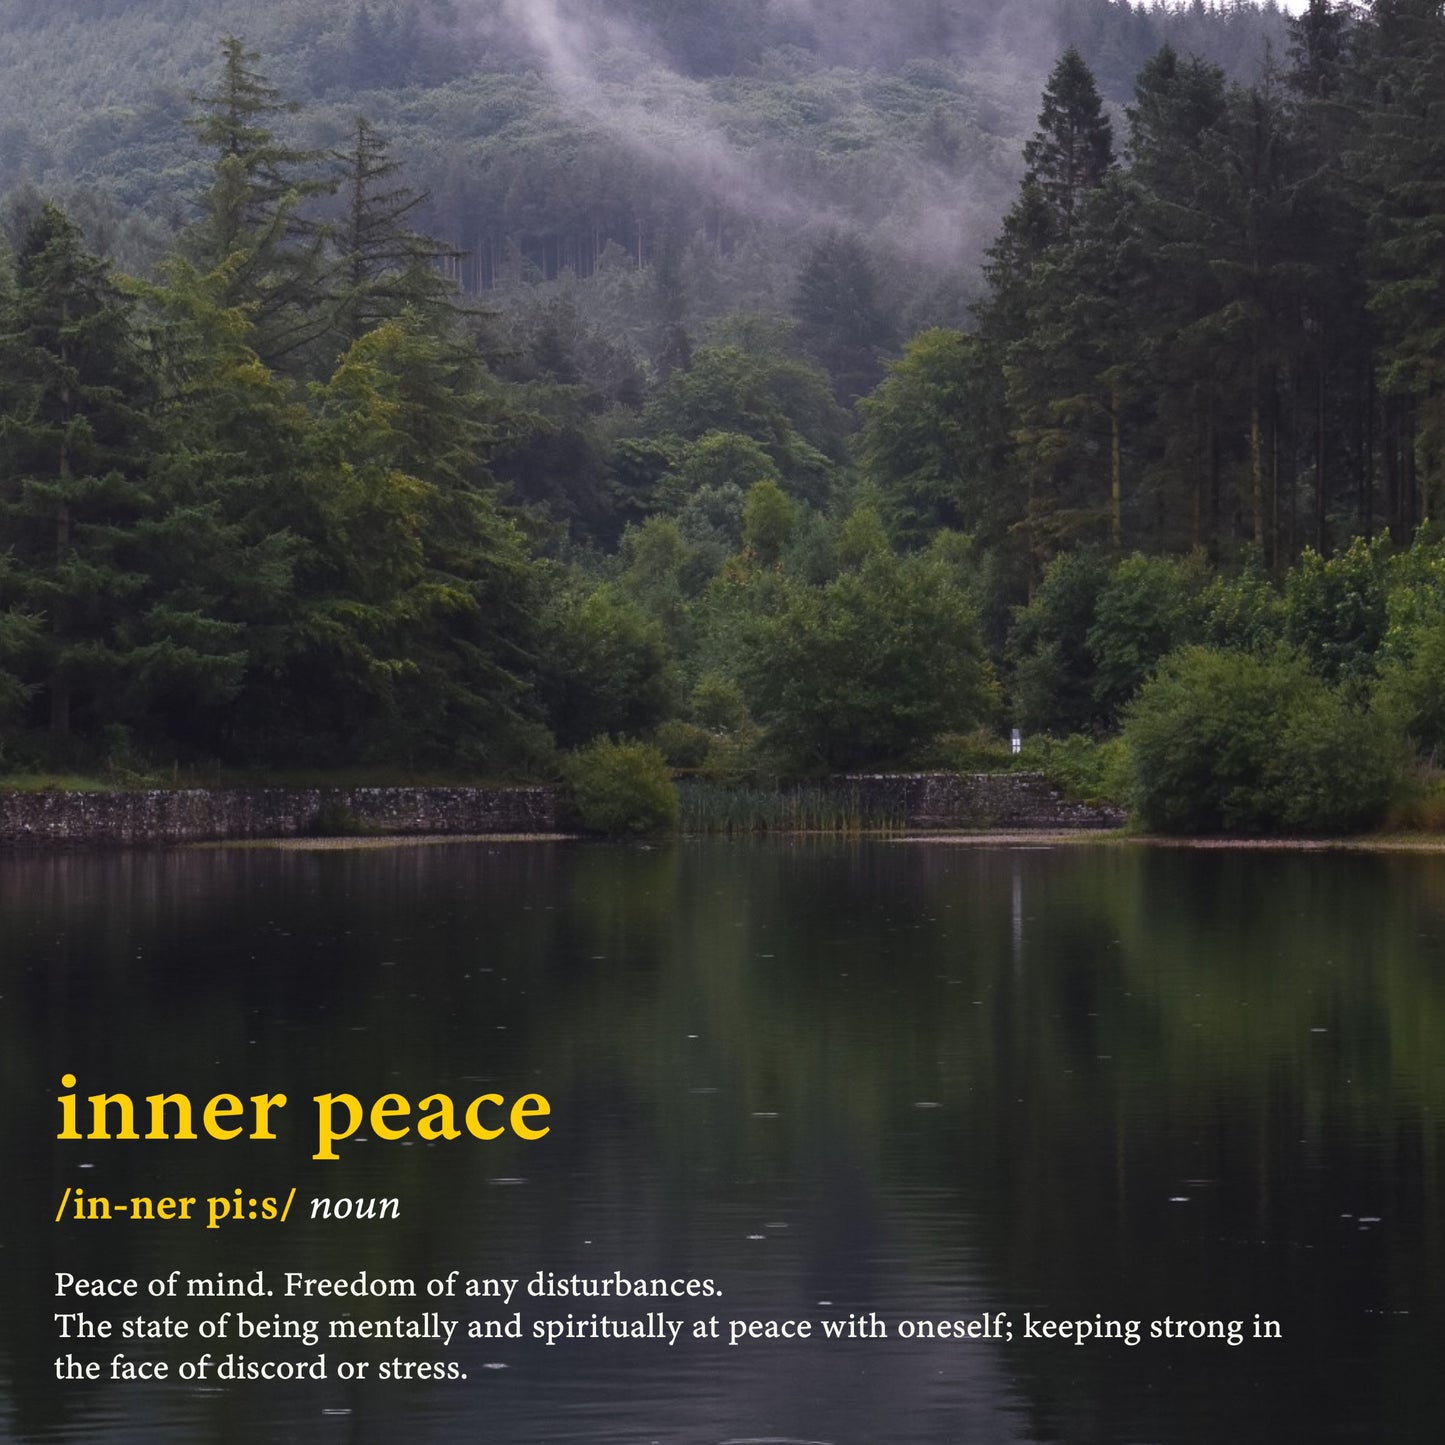 The inner peace word definition poster. Inner Peace (noun). Peace of mind. Freedom of disturbances. The state of being mentally and spirtiually at peace with oneself; keeping strong in the face of discord or stress. This photography print captures the fog lifting from the forest, trees and the lake.